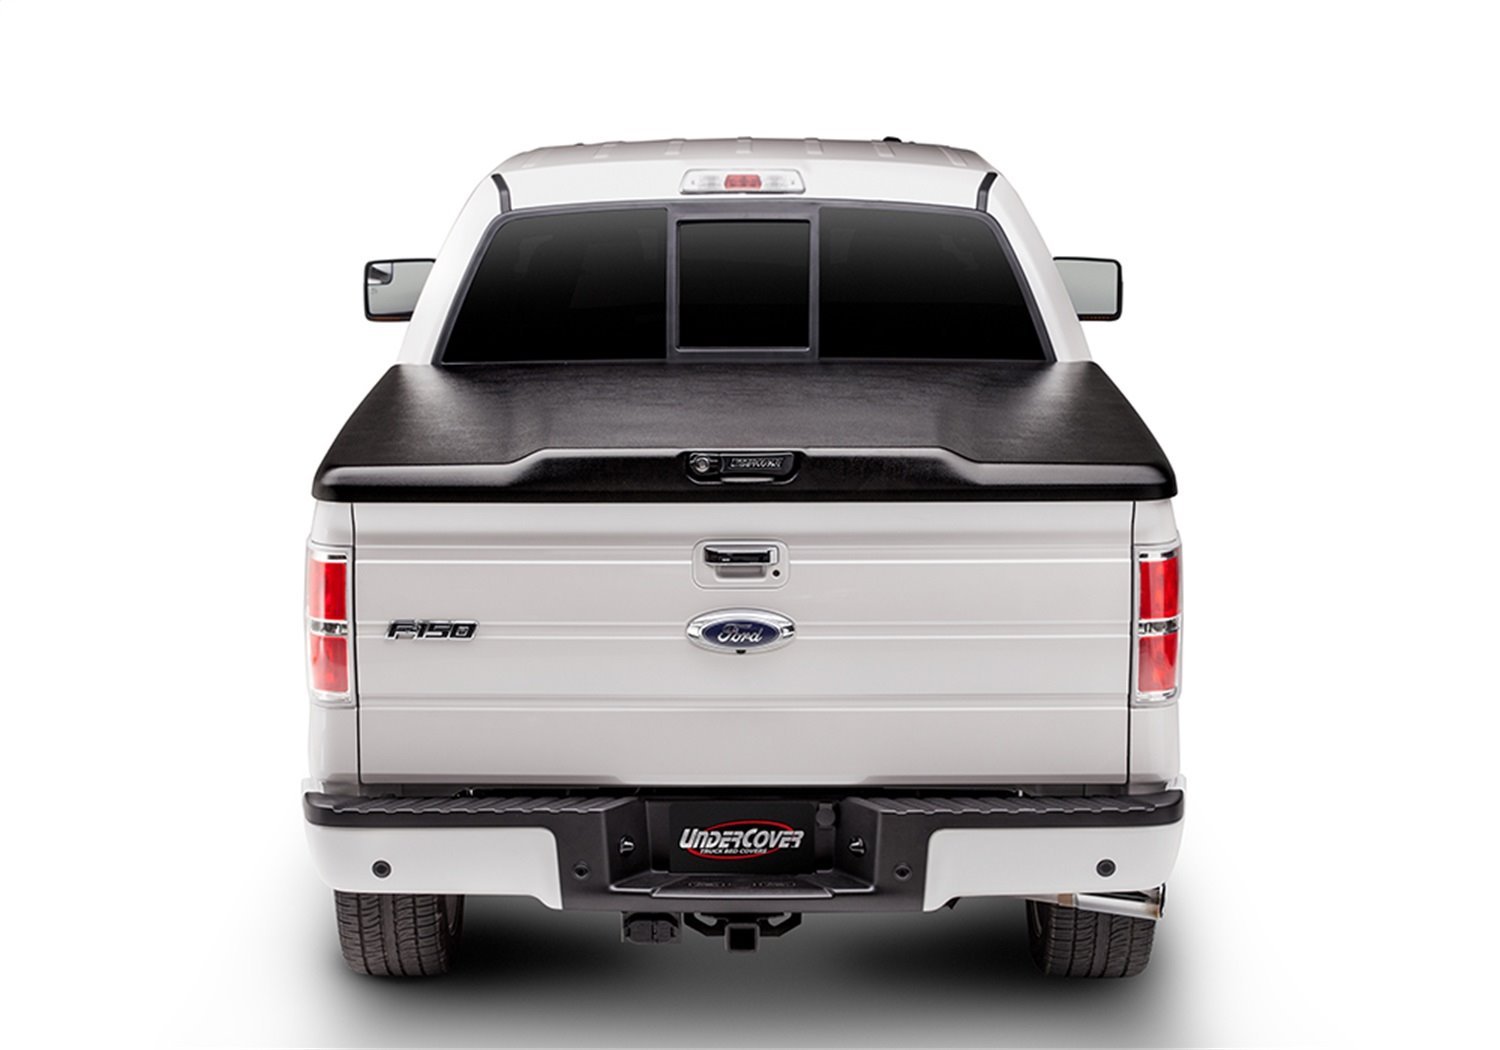 UC4138 Elite Hard Non-Folding Cover, Fits Select Toyota Tacoma 5'Bed Crew w/ Deck Rail System, Black Textured